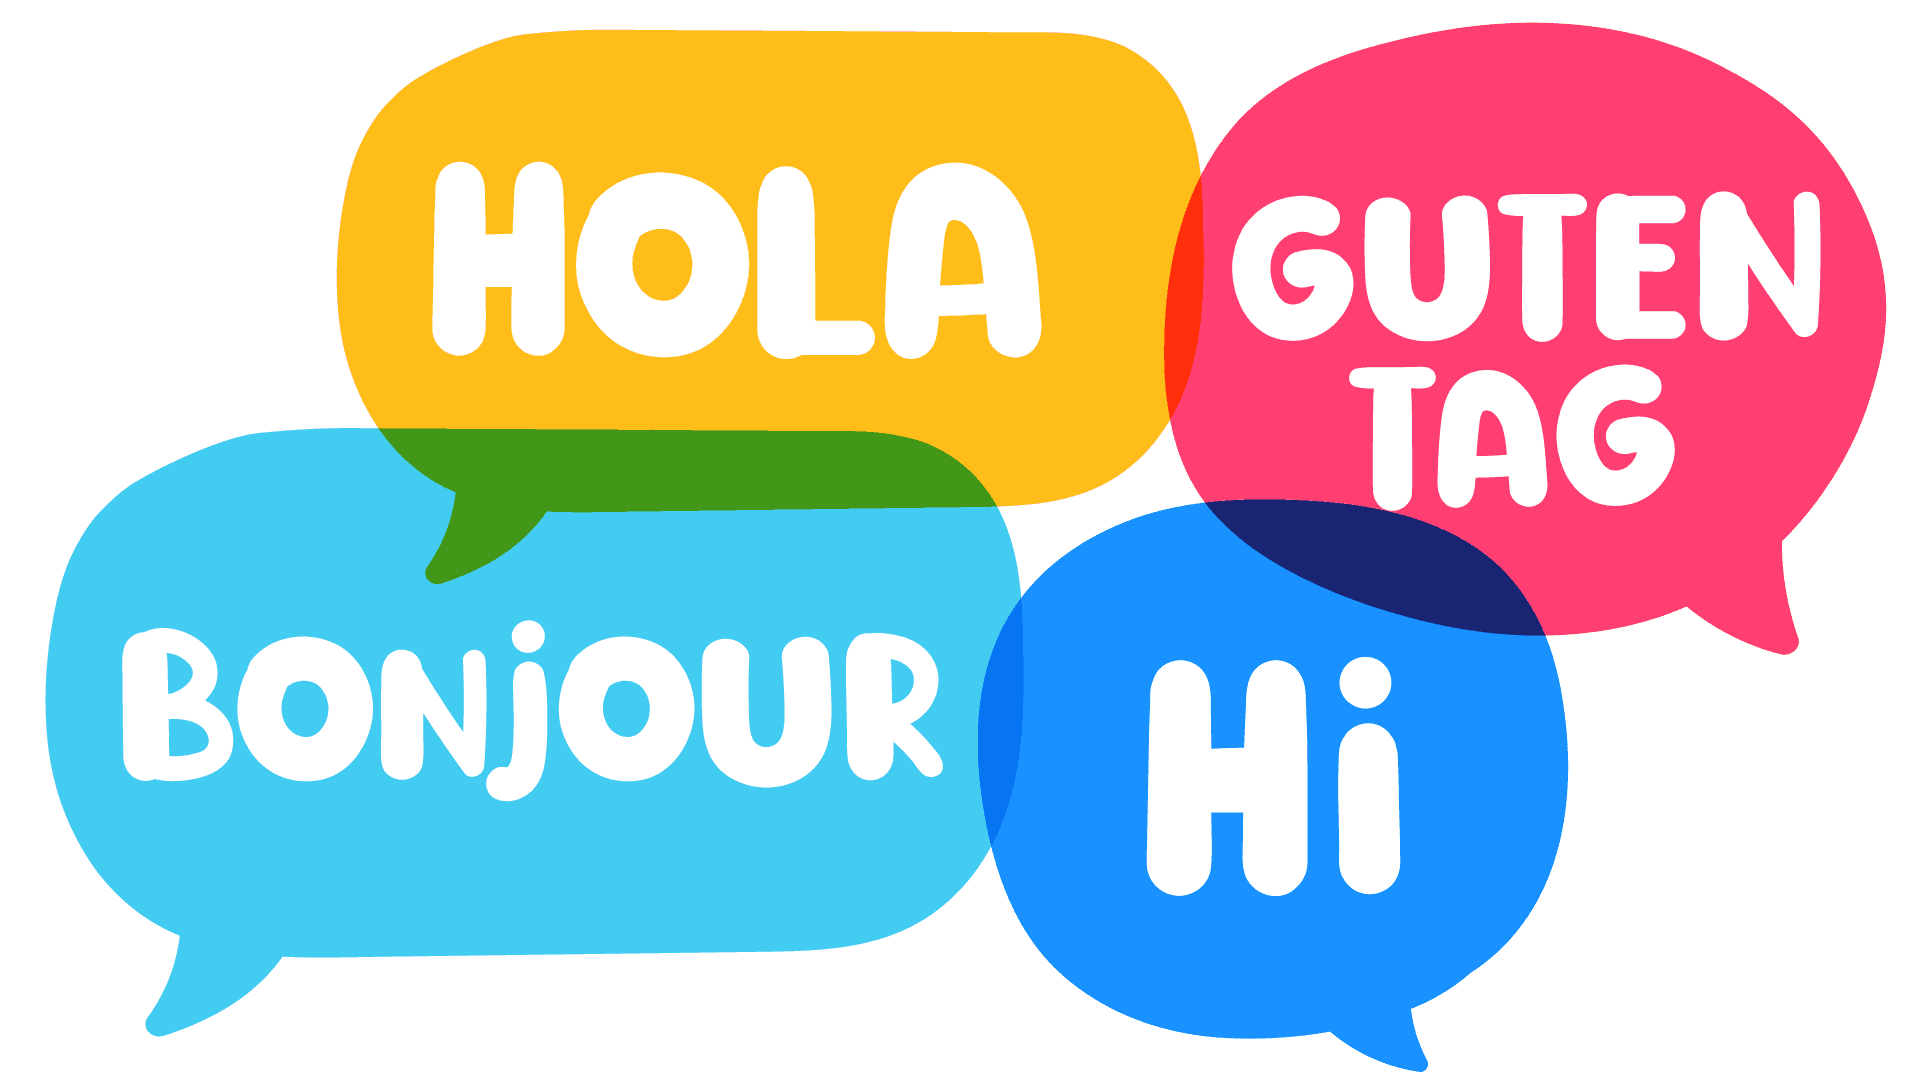 Speech bubbles that say "Hola," "Guten tag," "Bonjour" and "Hi"